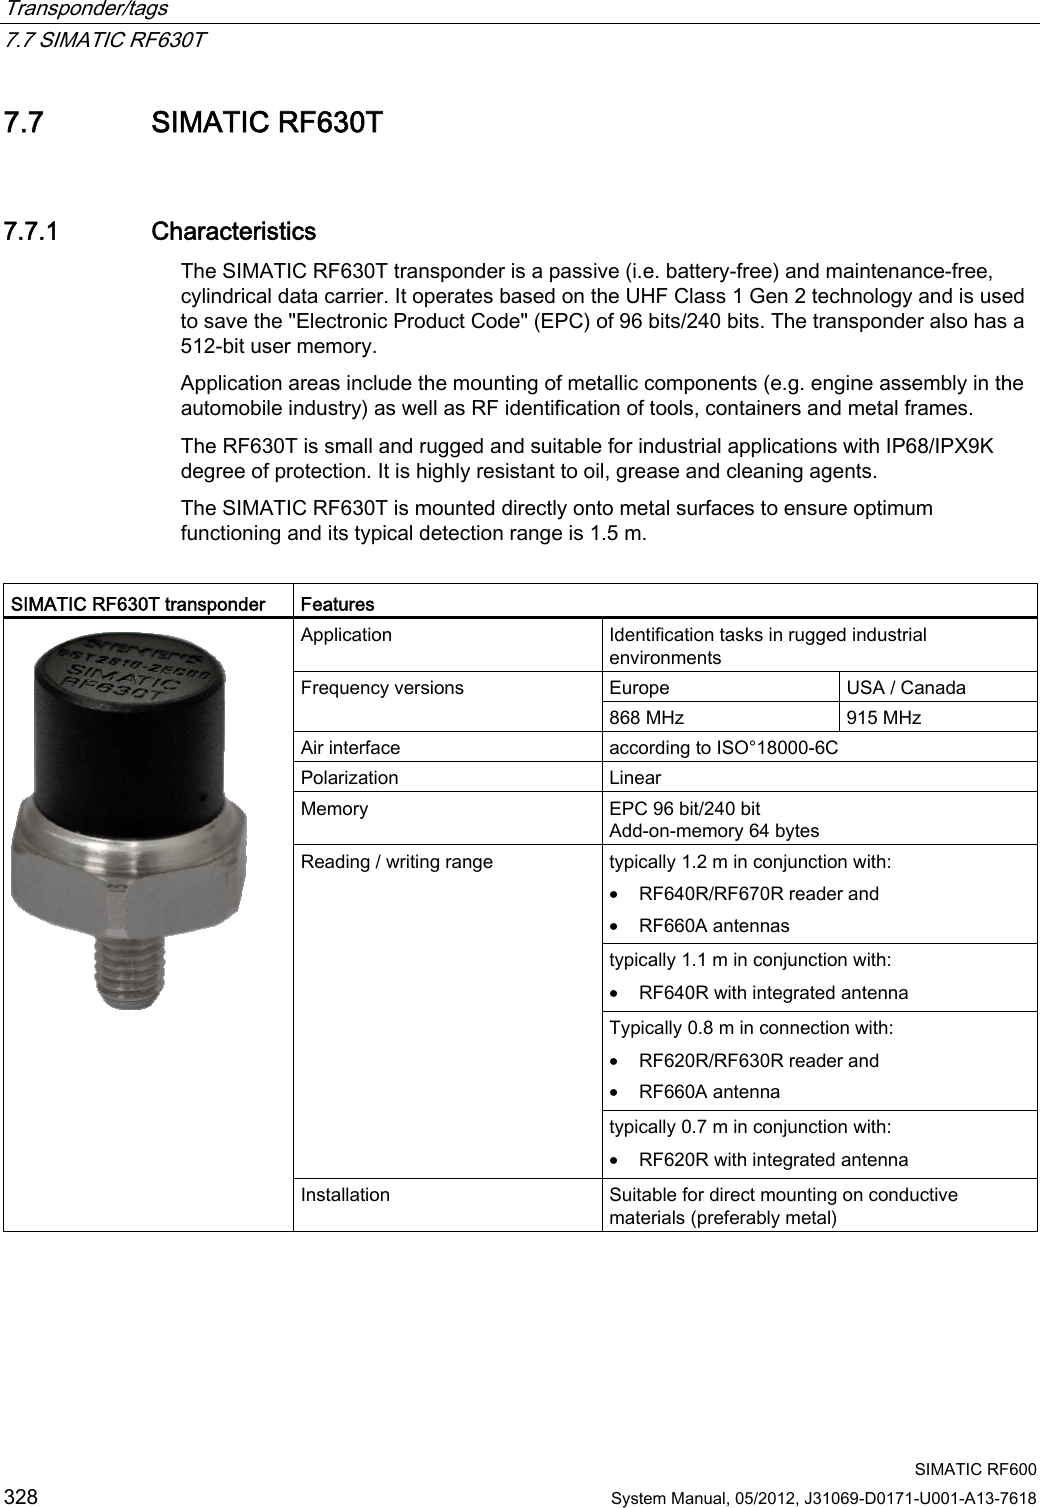 Transponder/tags   7.7 SIMATIC RF630T  SIMATIC RF600 328 System Manual, 05/2012, J31069-D0171-U001-A13-7618 7.7 SIMATIC RF630T 7.7.1 Characteristics The SIMATIC RF630T transponder is a passive (i.e. battery-free) and maintenance-free, cylindrical data carrier. It operates based on the UHF Class 1 Gen 2 technology and is used to save the &quot;Electronic Product Code&quot; (EPC) of 96 bits/240 bits. The transponder also has a 512-bit user memory. Application areas include the mounting of metallic components (e.g. engine assembly in the automobile industry) as well as RF identification of tools, containers and metal frames. The RF630T is small and rugged and suitable for industrial applications with IP68/IPX9K degree of protection. It is highly resistant to oil, grease and cleaning agents.  The SIMATIC RF630T is mounted directly onto metal surfaces to ensure optimum functioning and its typical detection range is 1.5 m.  SIMATIC RF630T transponder  Features Application  Identification tasks in rugged industrial environments Europe  USA / Canada Frequency versions 868 MHz  915 MHz Air interface  according to ISO°18000-6C Polarization   Linear Memory  EPC 96 bit/240 bit Add-on-memory 64 bytes typically 1.2 m in conjunction with: • RF640R/RF670R reader and • RF660A antennas typically 1.1 m in conjunction with: • RF640R with integrated antenna Typically 0.8 m in connection with: • RF620R/RF630R reader and • RF660A antenna Reading / writing range typically 0.7 m in conjunction with: • RF620R with integrated antenna  Installation  Suitable for direct mounting on conductive materials (preferably metal) 